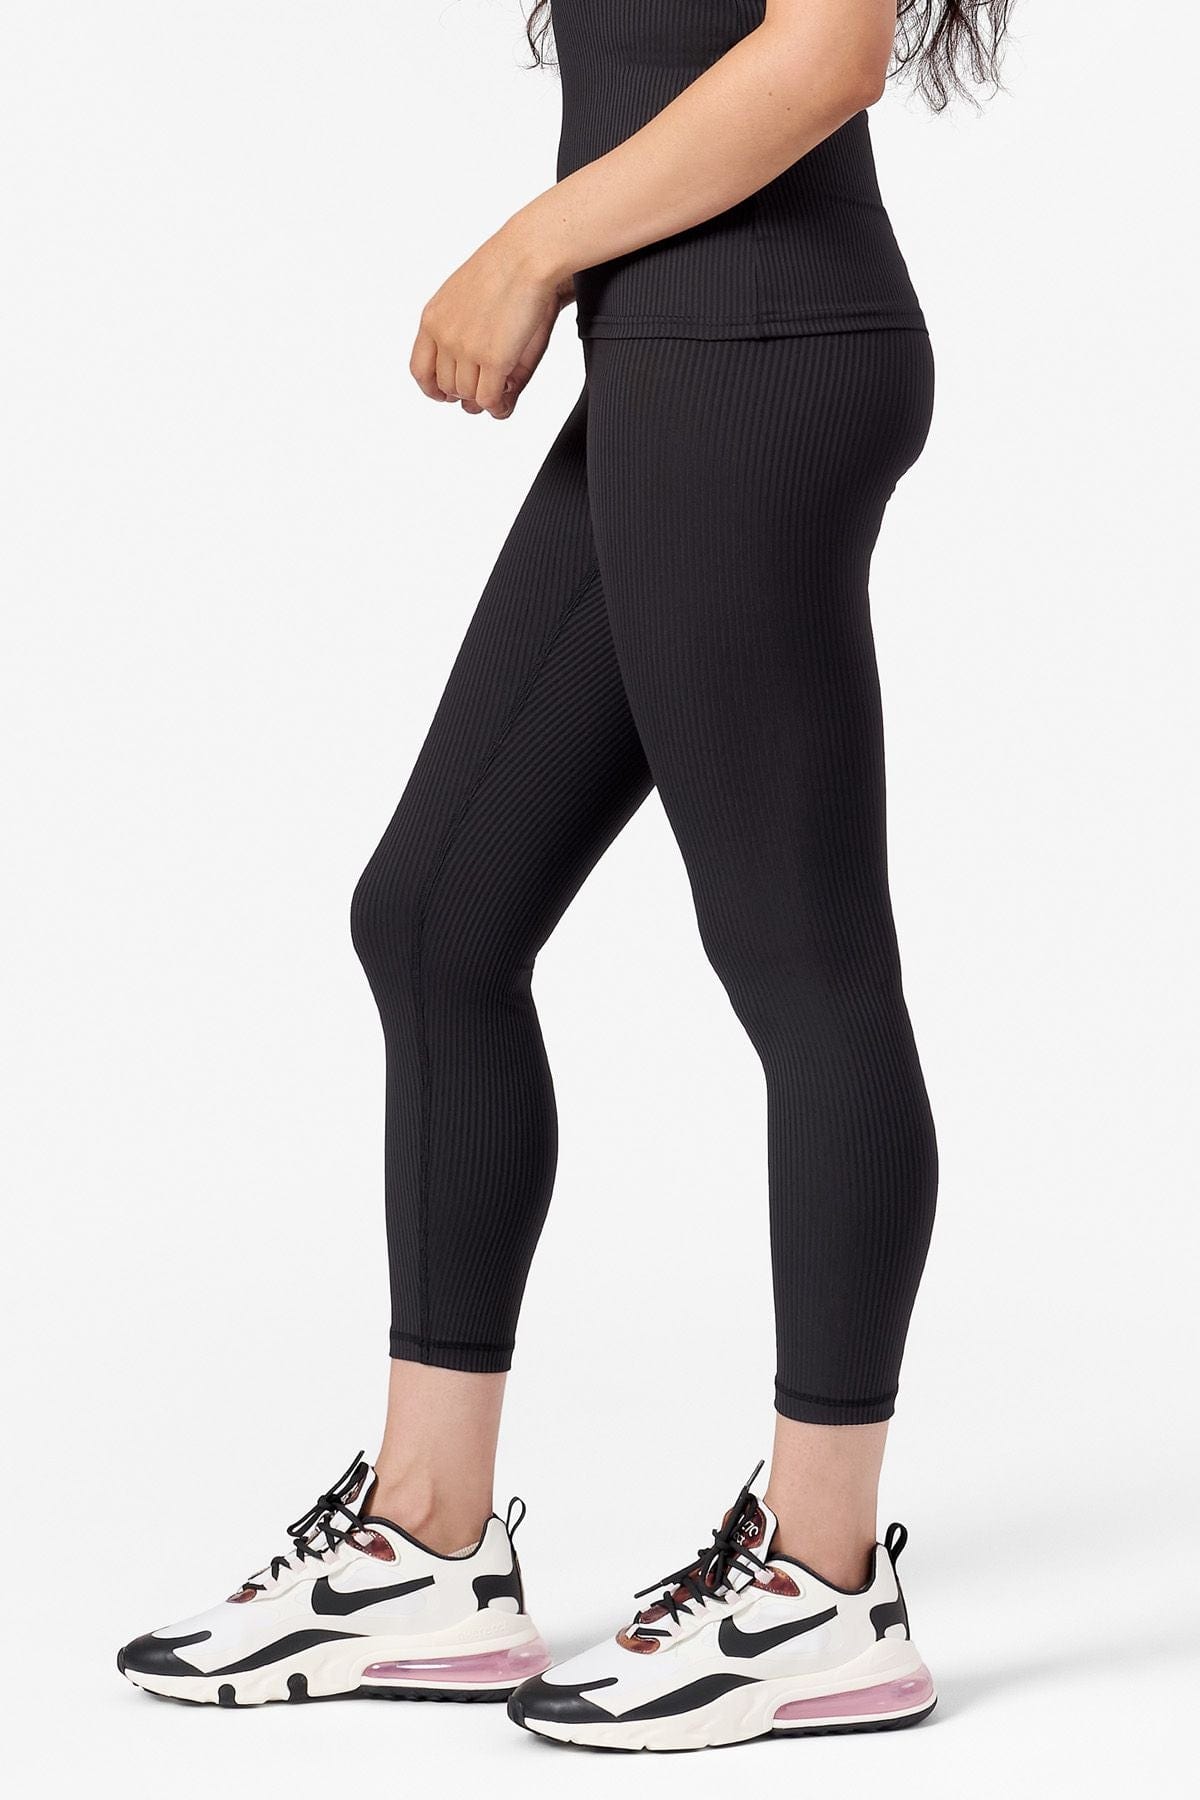 side view of a woman wearing black ribbed leggings in a mid length